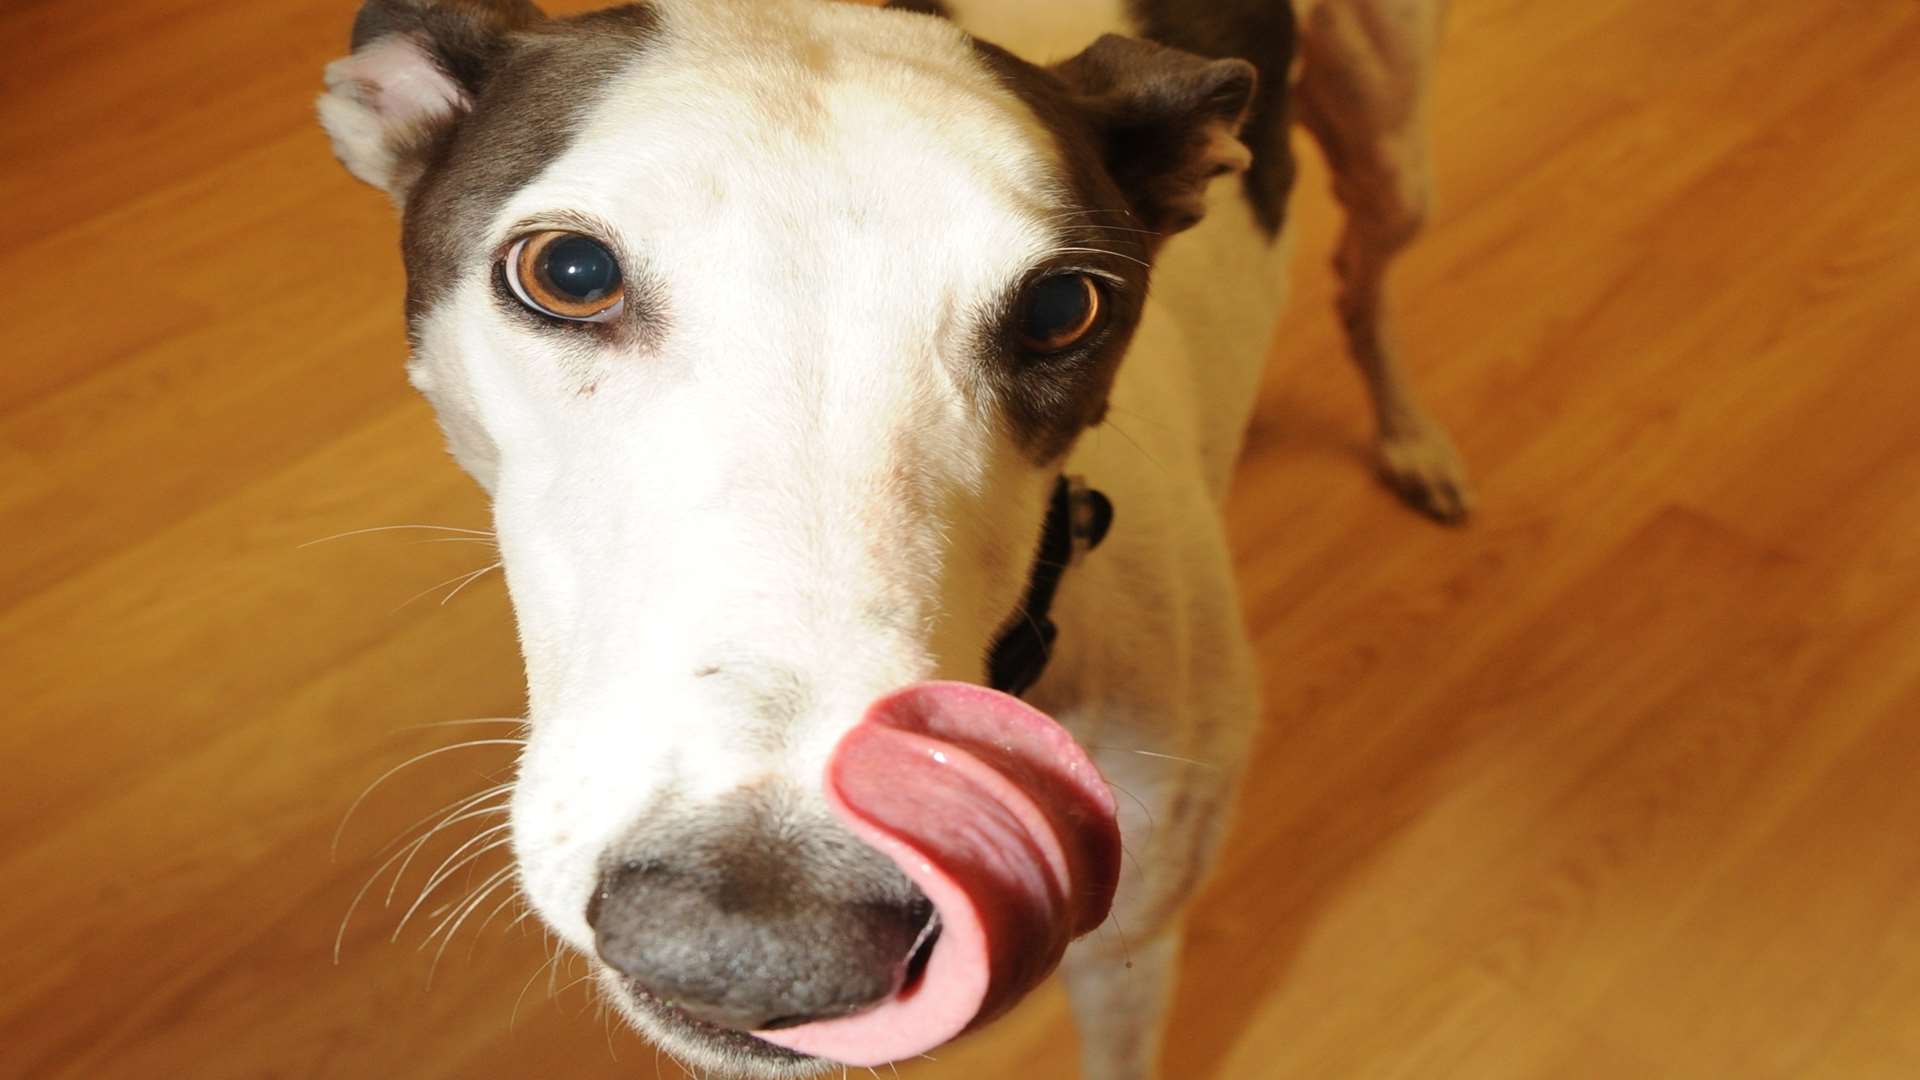 Nelson the greyhound helps relieve stress. Picture: Steve Crispe